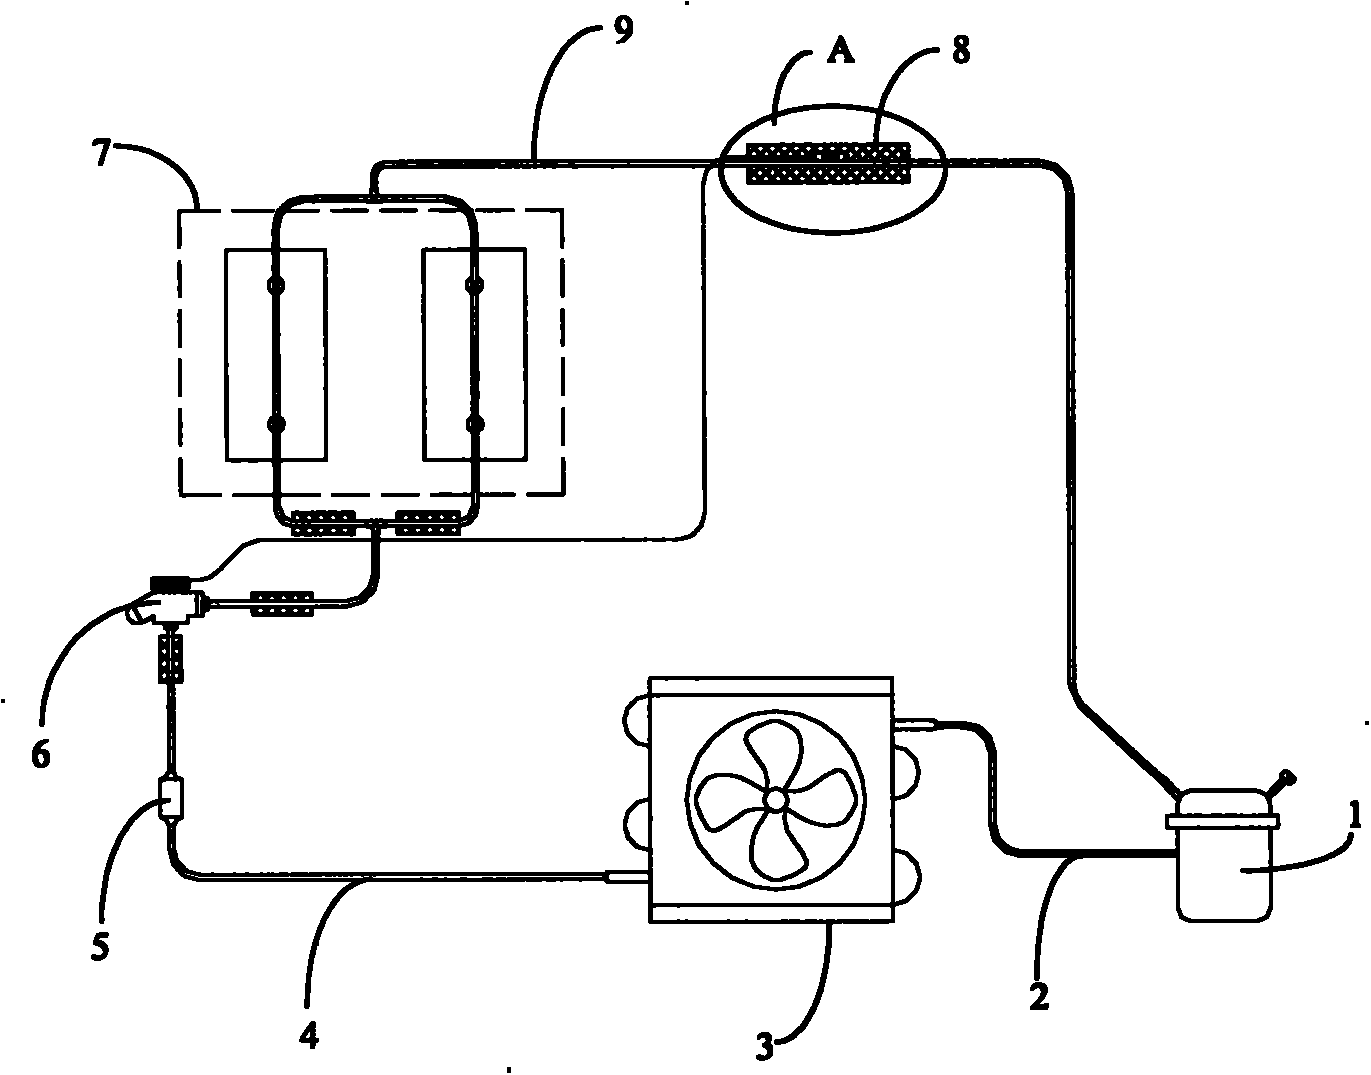 Refrigerating system and ice cream maker